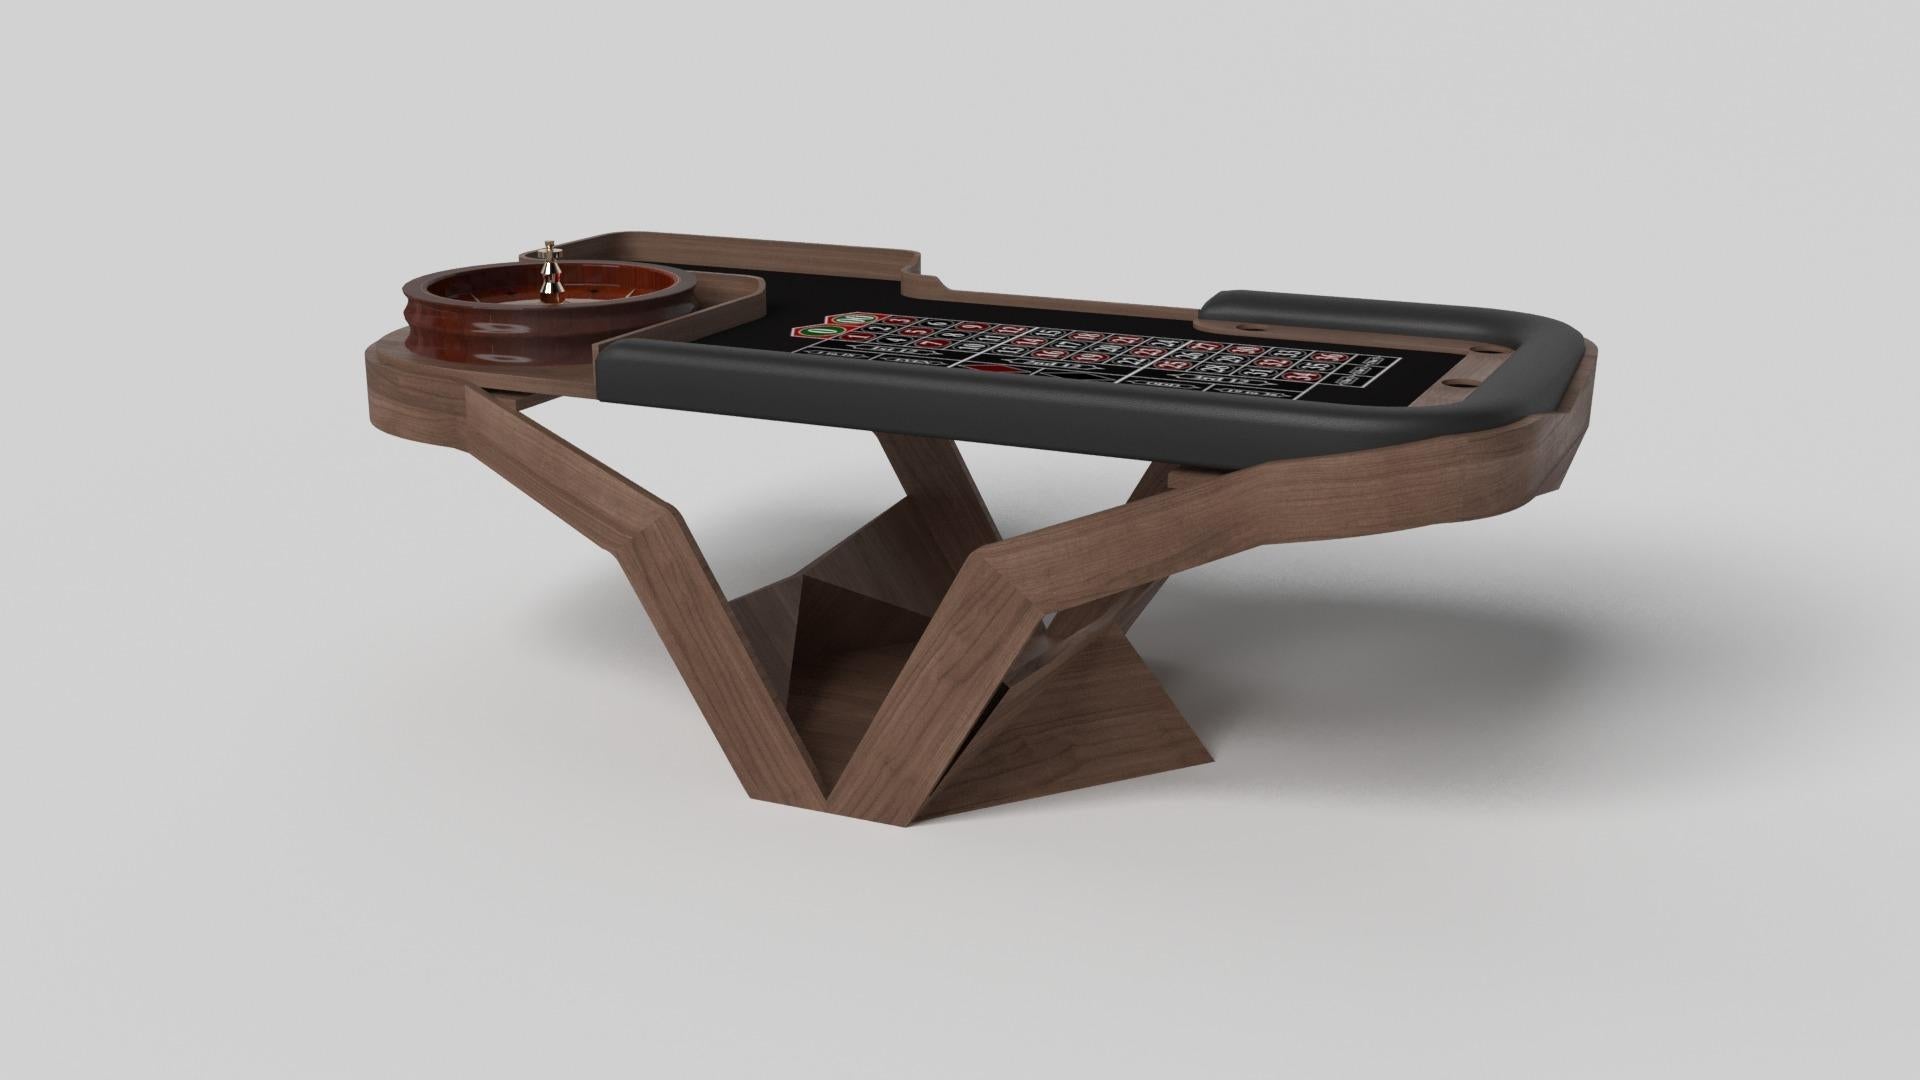 The Enzo roulette table is Inspired by the aerodynamic angles of top-of-the-line European vehicles. Designed with sleek, V-shaped lines and a thoughtful use of negative space, this table boasts an energetic sense of spirit while epitomizing the look